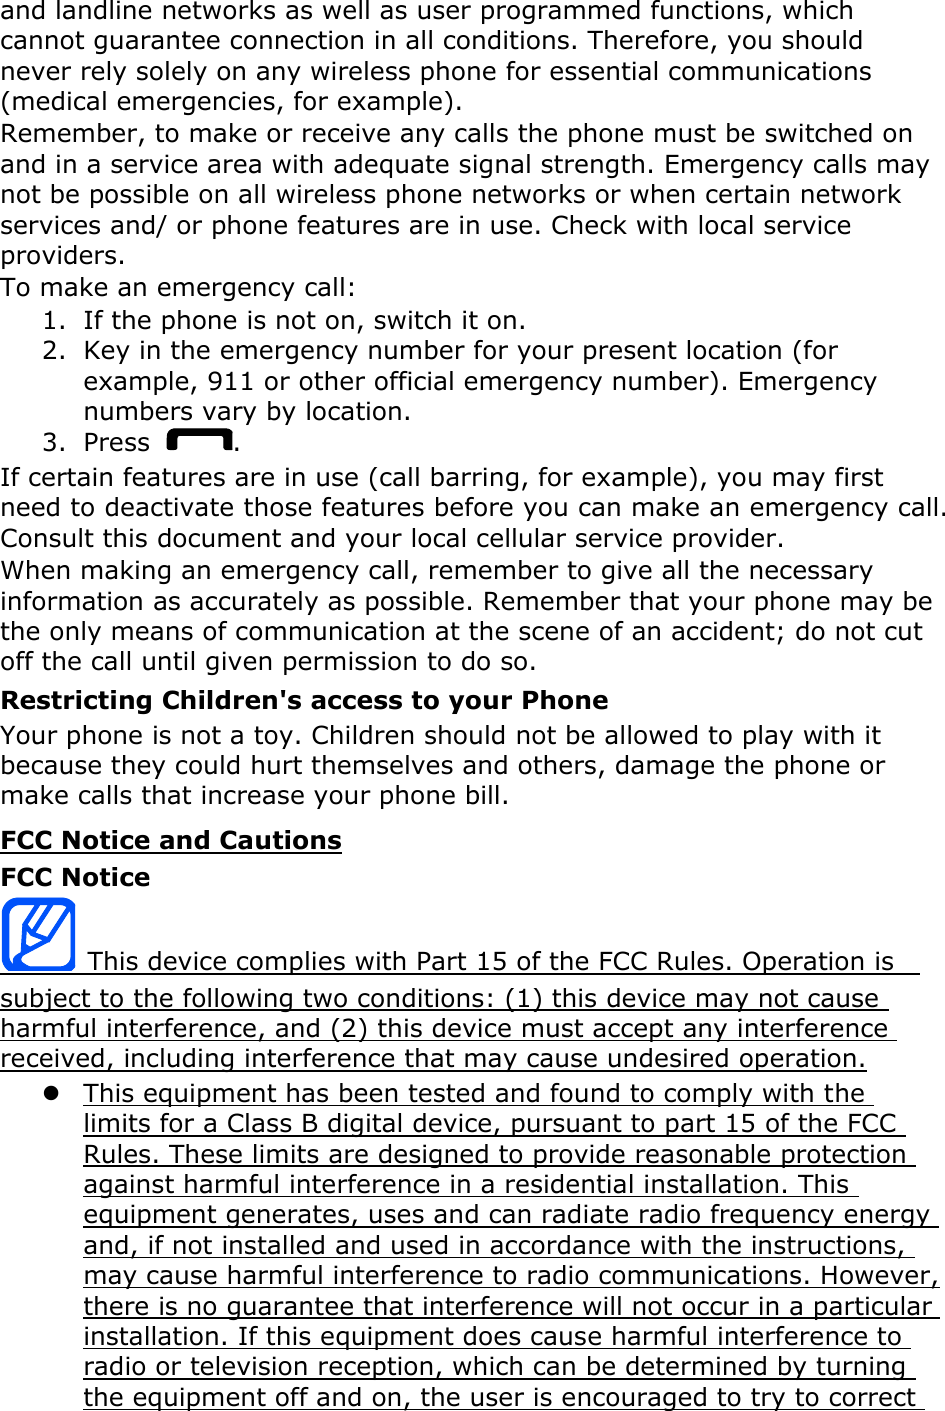 Page 16 of Samsung Electronics Co GTS3850 Cellular/PCS GSM Phone with WLAN and Bluetooth User Manual